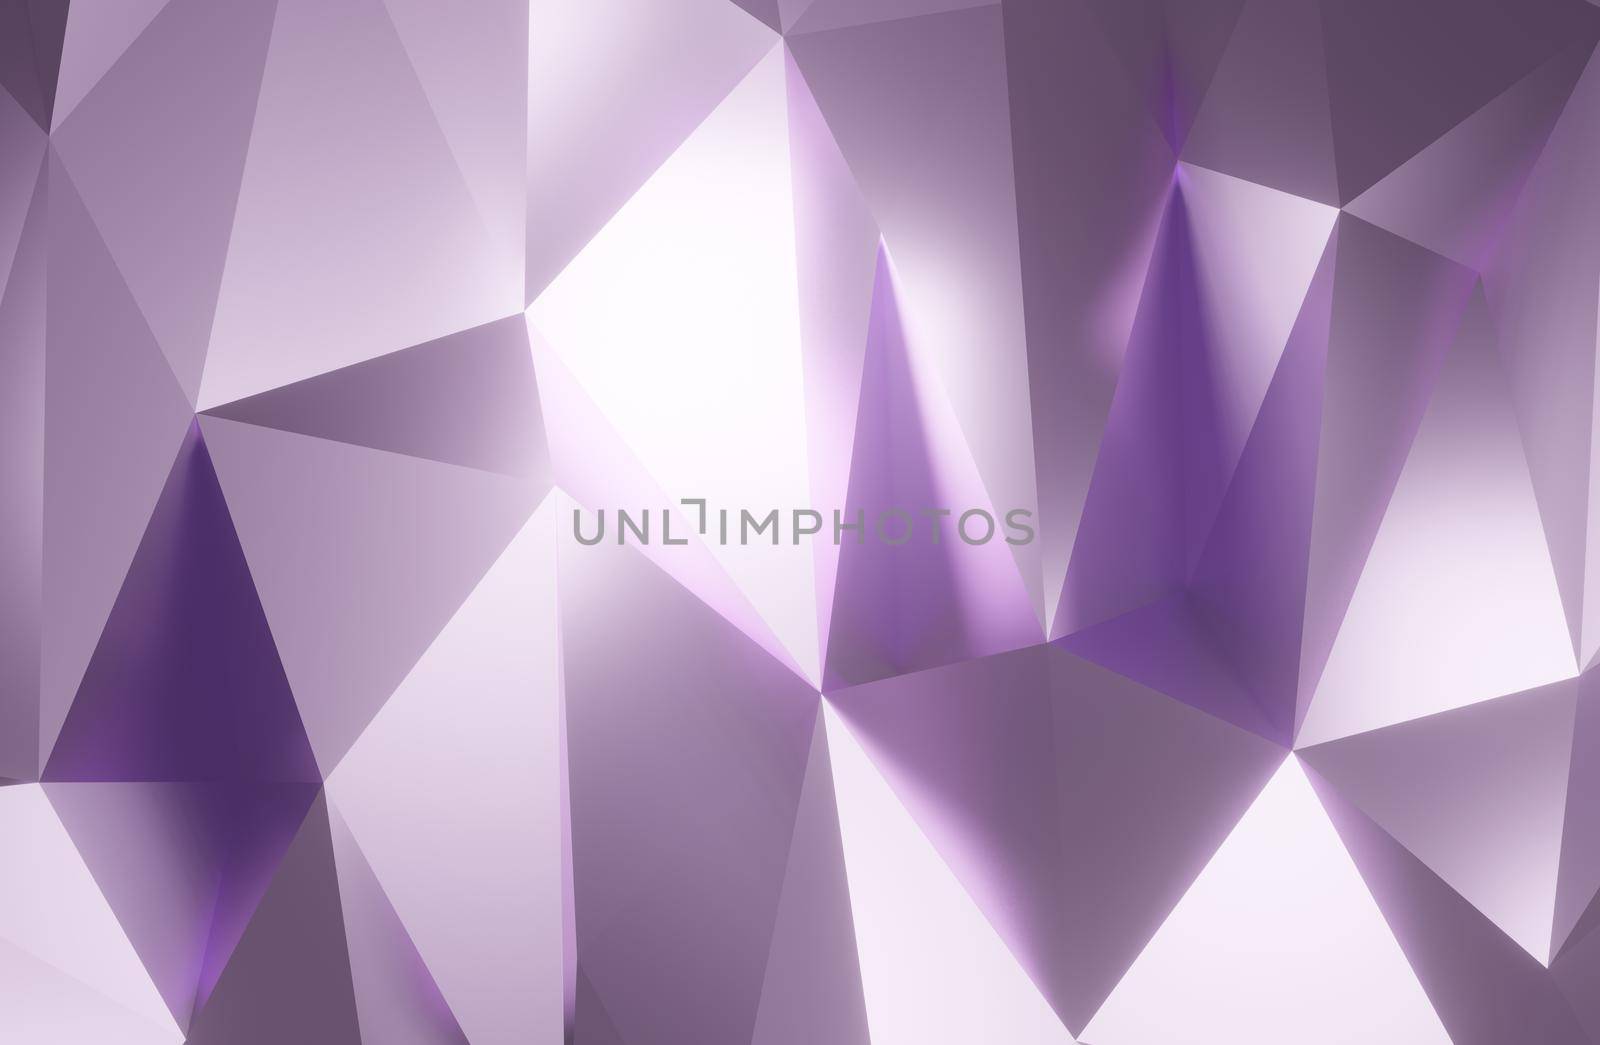 Abstract geometric pattern background polygonal triangle background purple 3d rendering